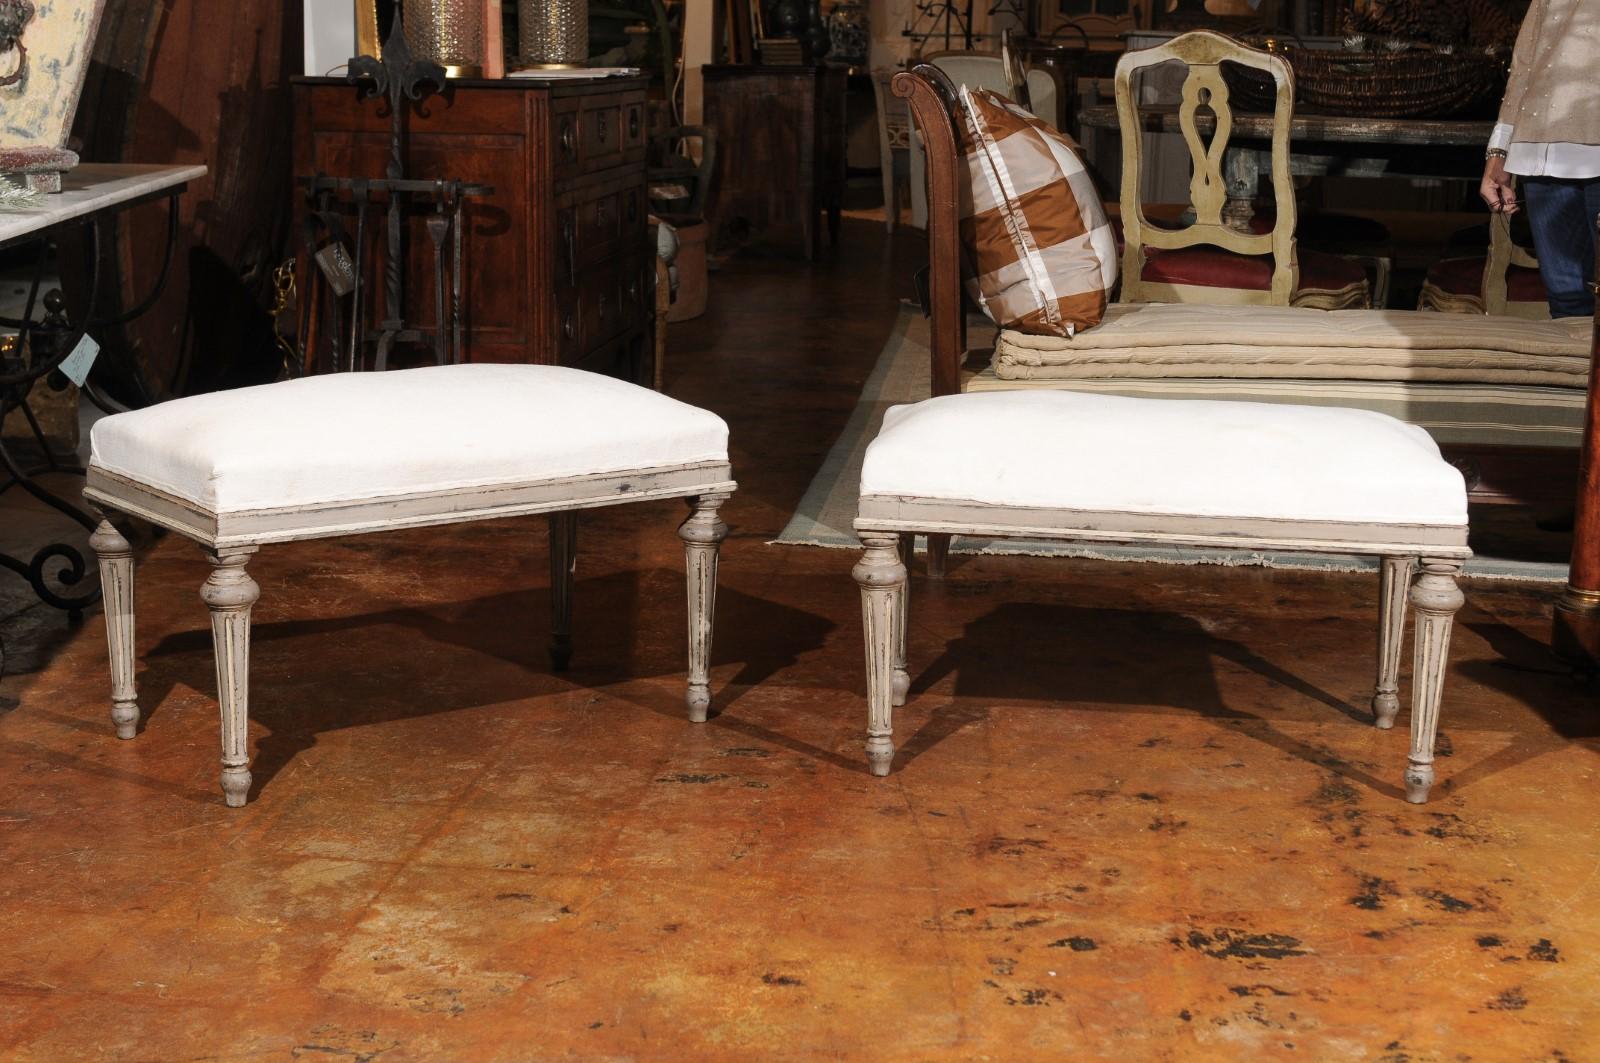  French Louis XVI style hand painted bench from the 19th century, with fluted legs. This  French 19th century bench features the stylistic characteristics of the Louis XVI period. The bench presents a rectangular seat covered with a simple muslin